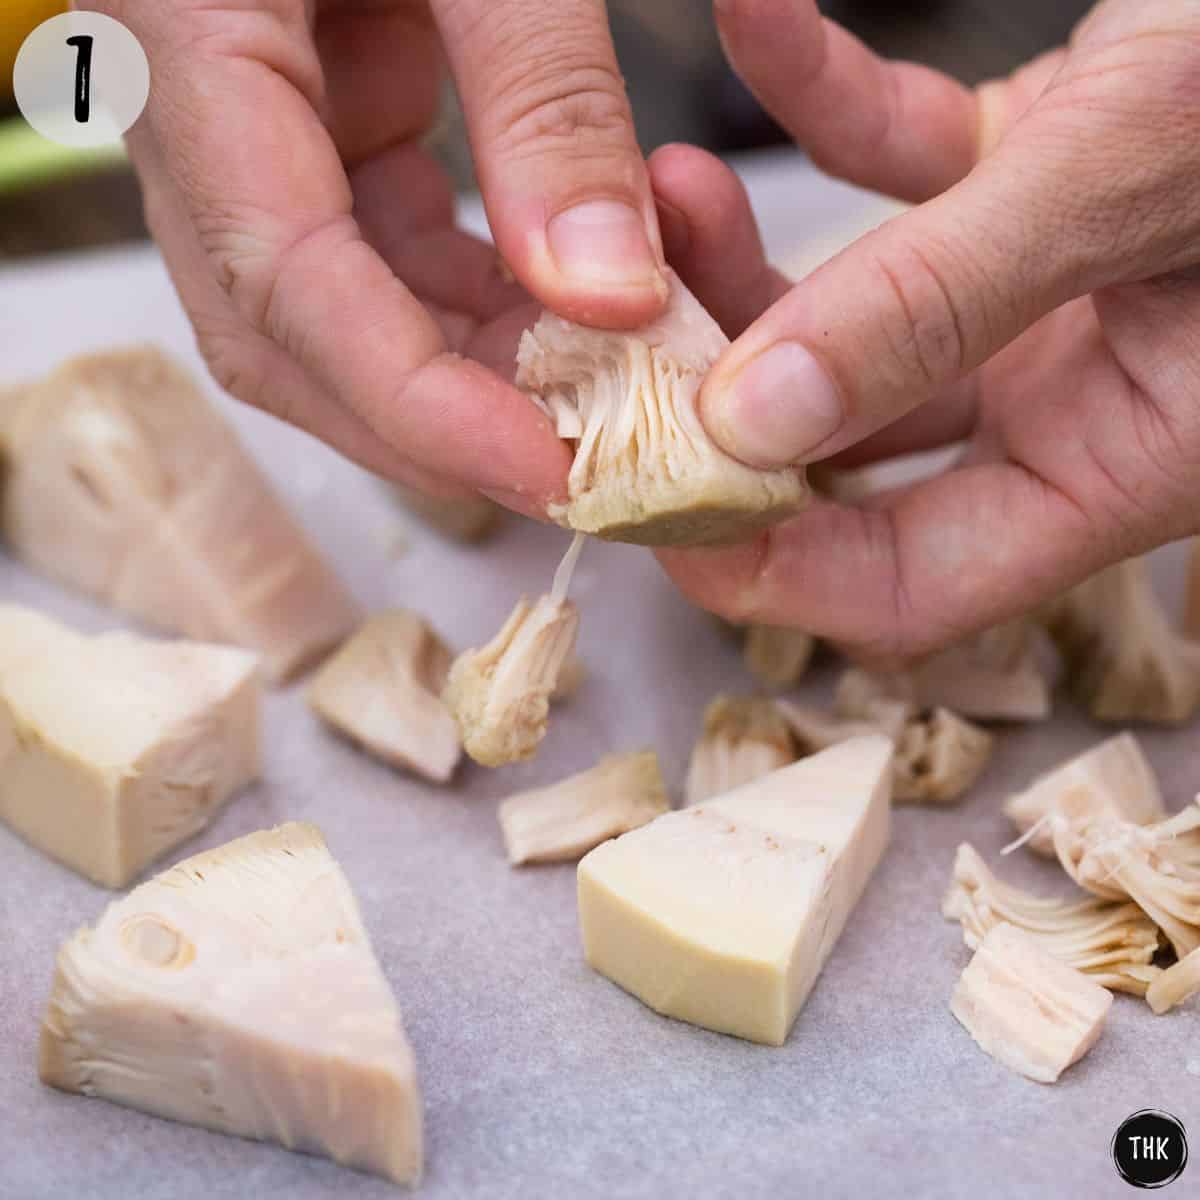 Jackfruit chunks being pulled apart with hands.